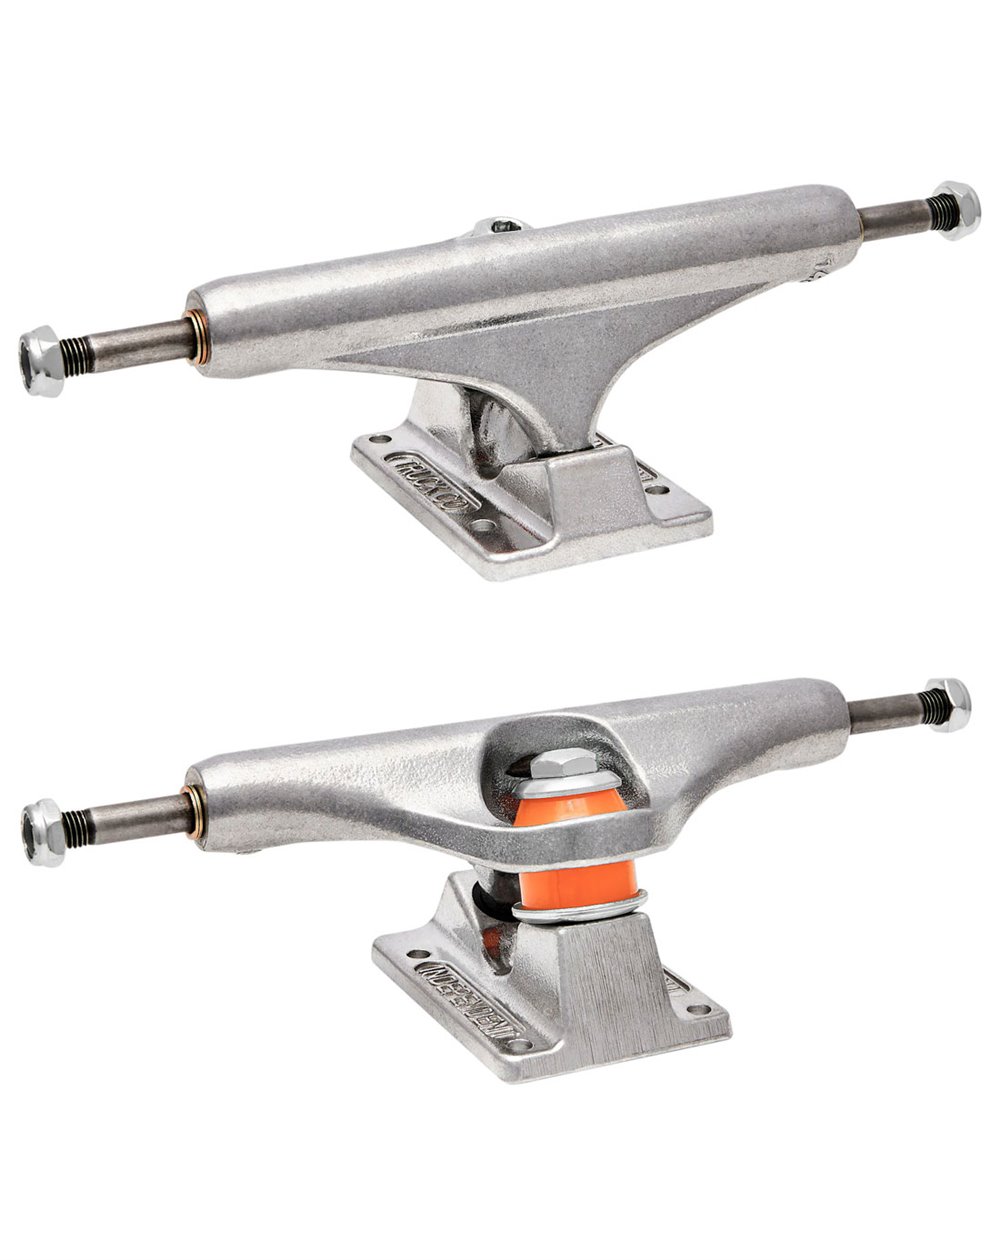 Independent MiD 139mm Skateboard Trucks pack of 2